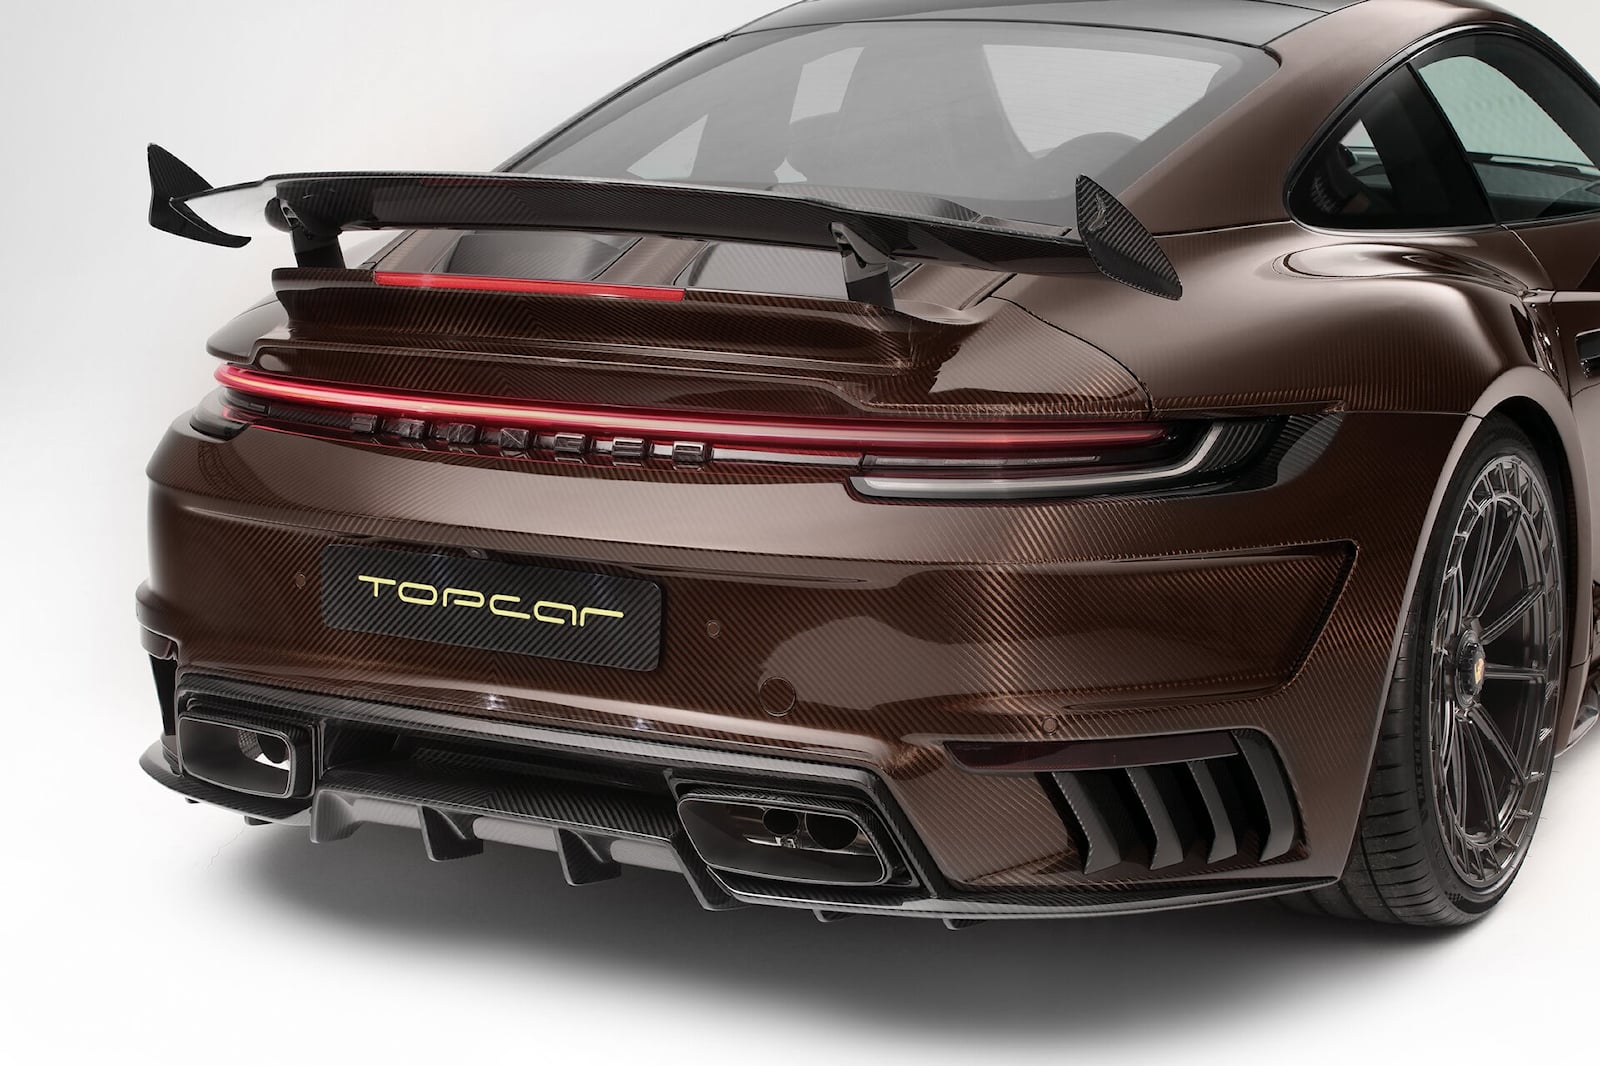 Porsche 911 Turbo S Covered In Chocolate Carbon Looks Good Enough To Eat